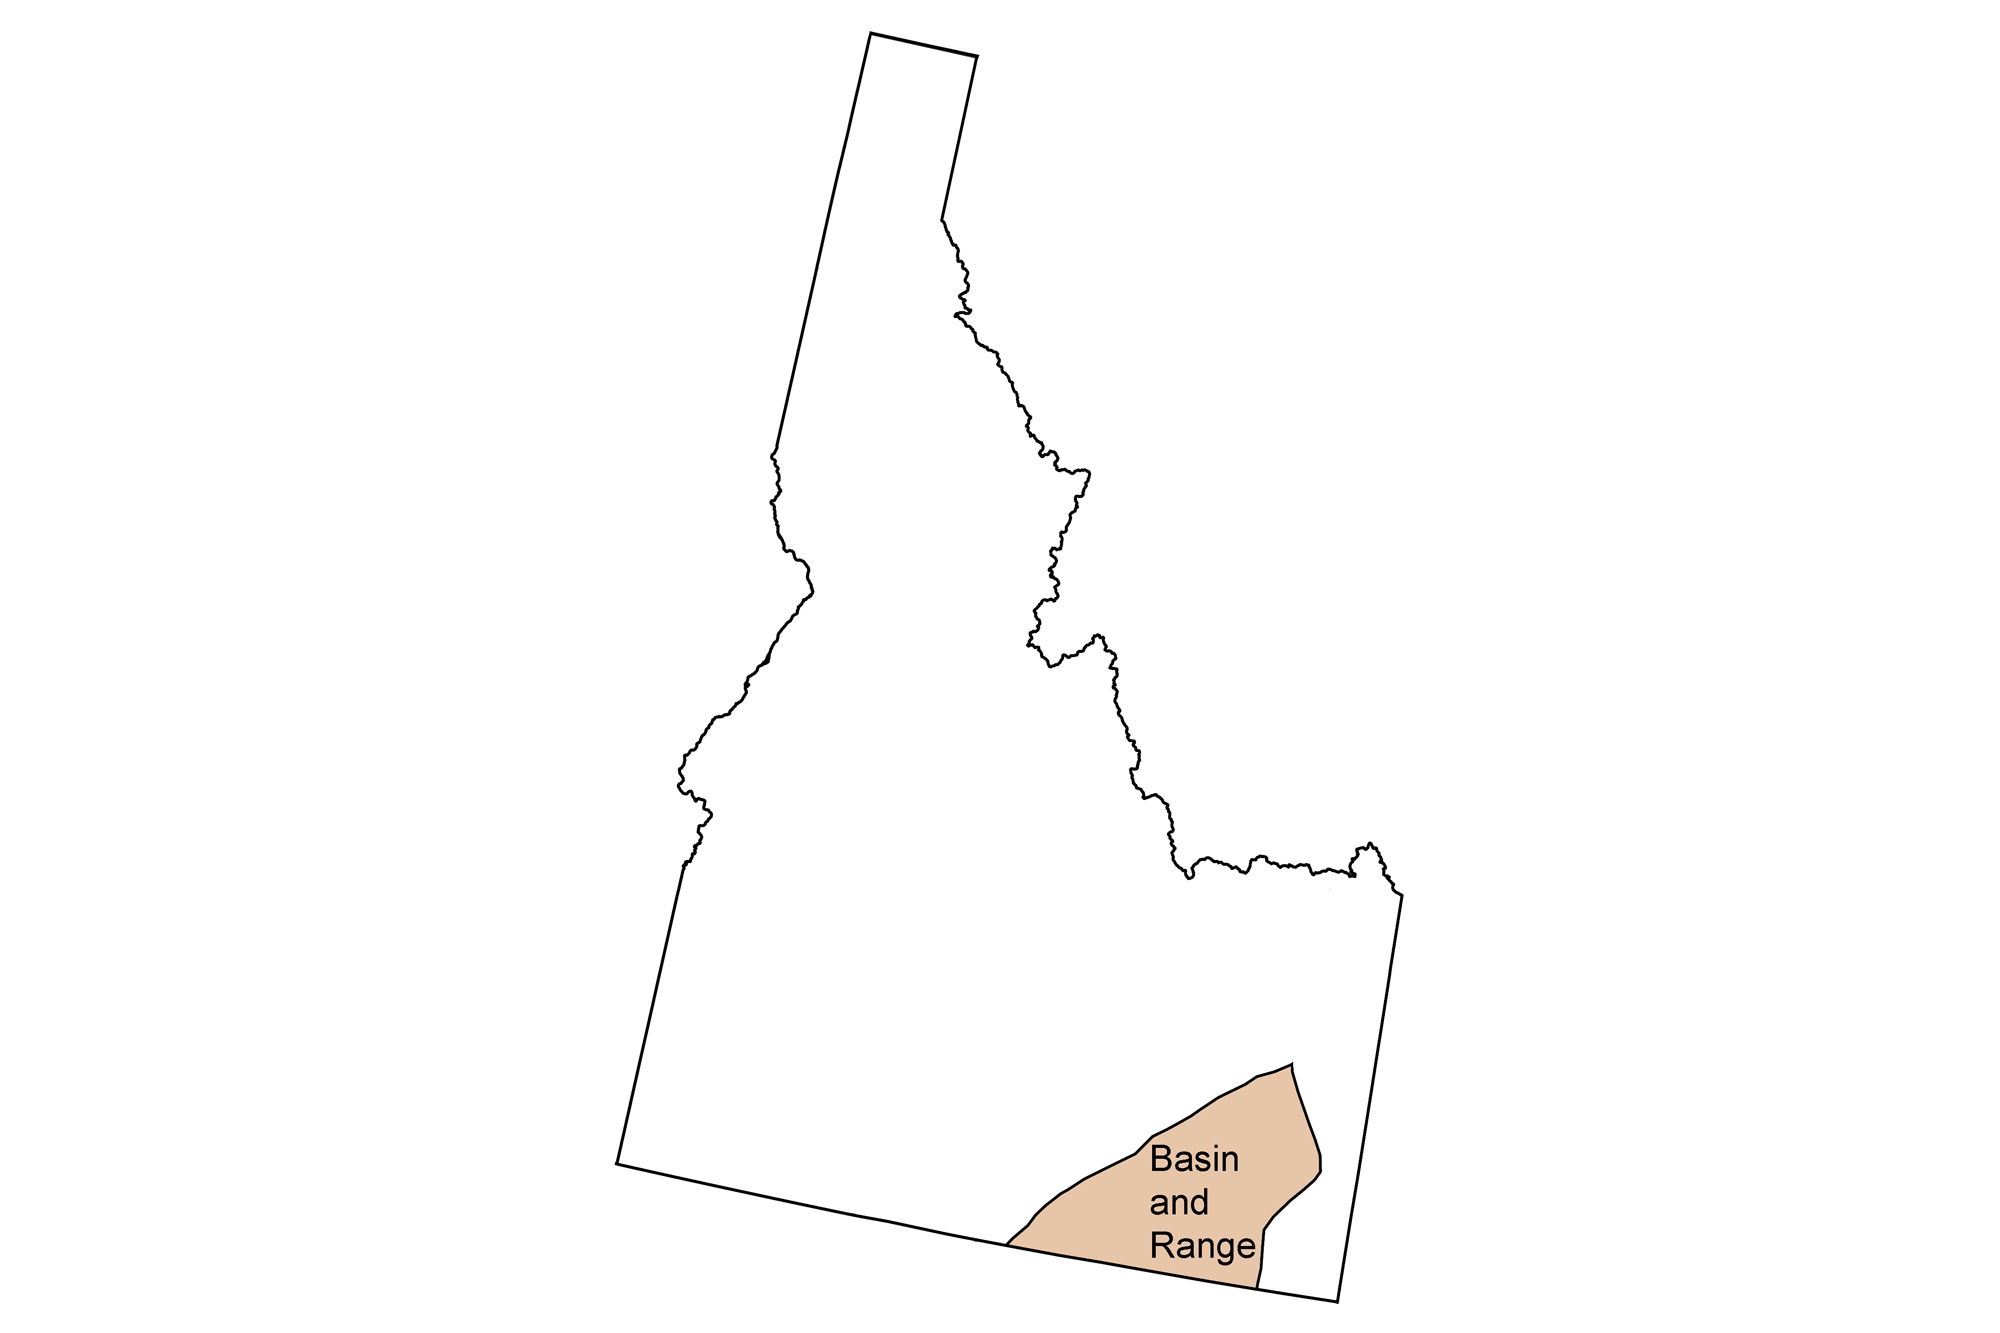 Simple map showing the Basin and Range region of the northwest-central United States, which occurs entirely within Idaho.